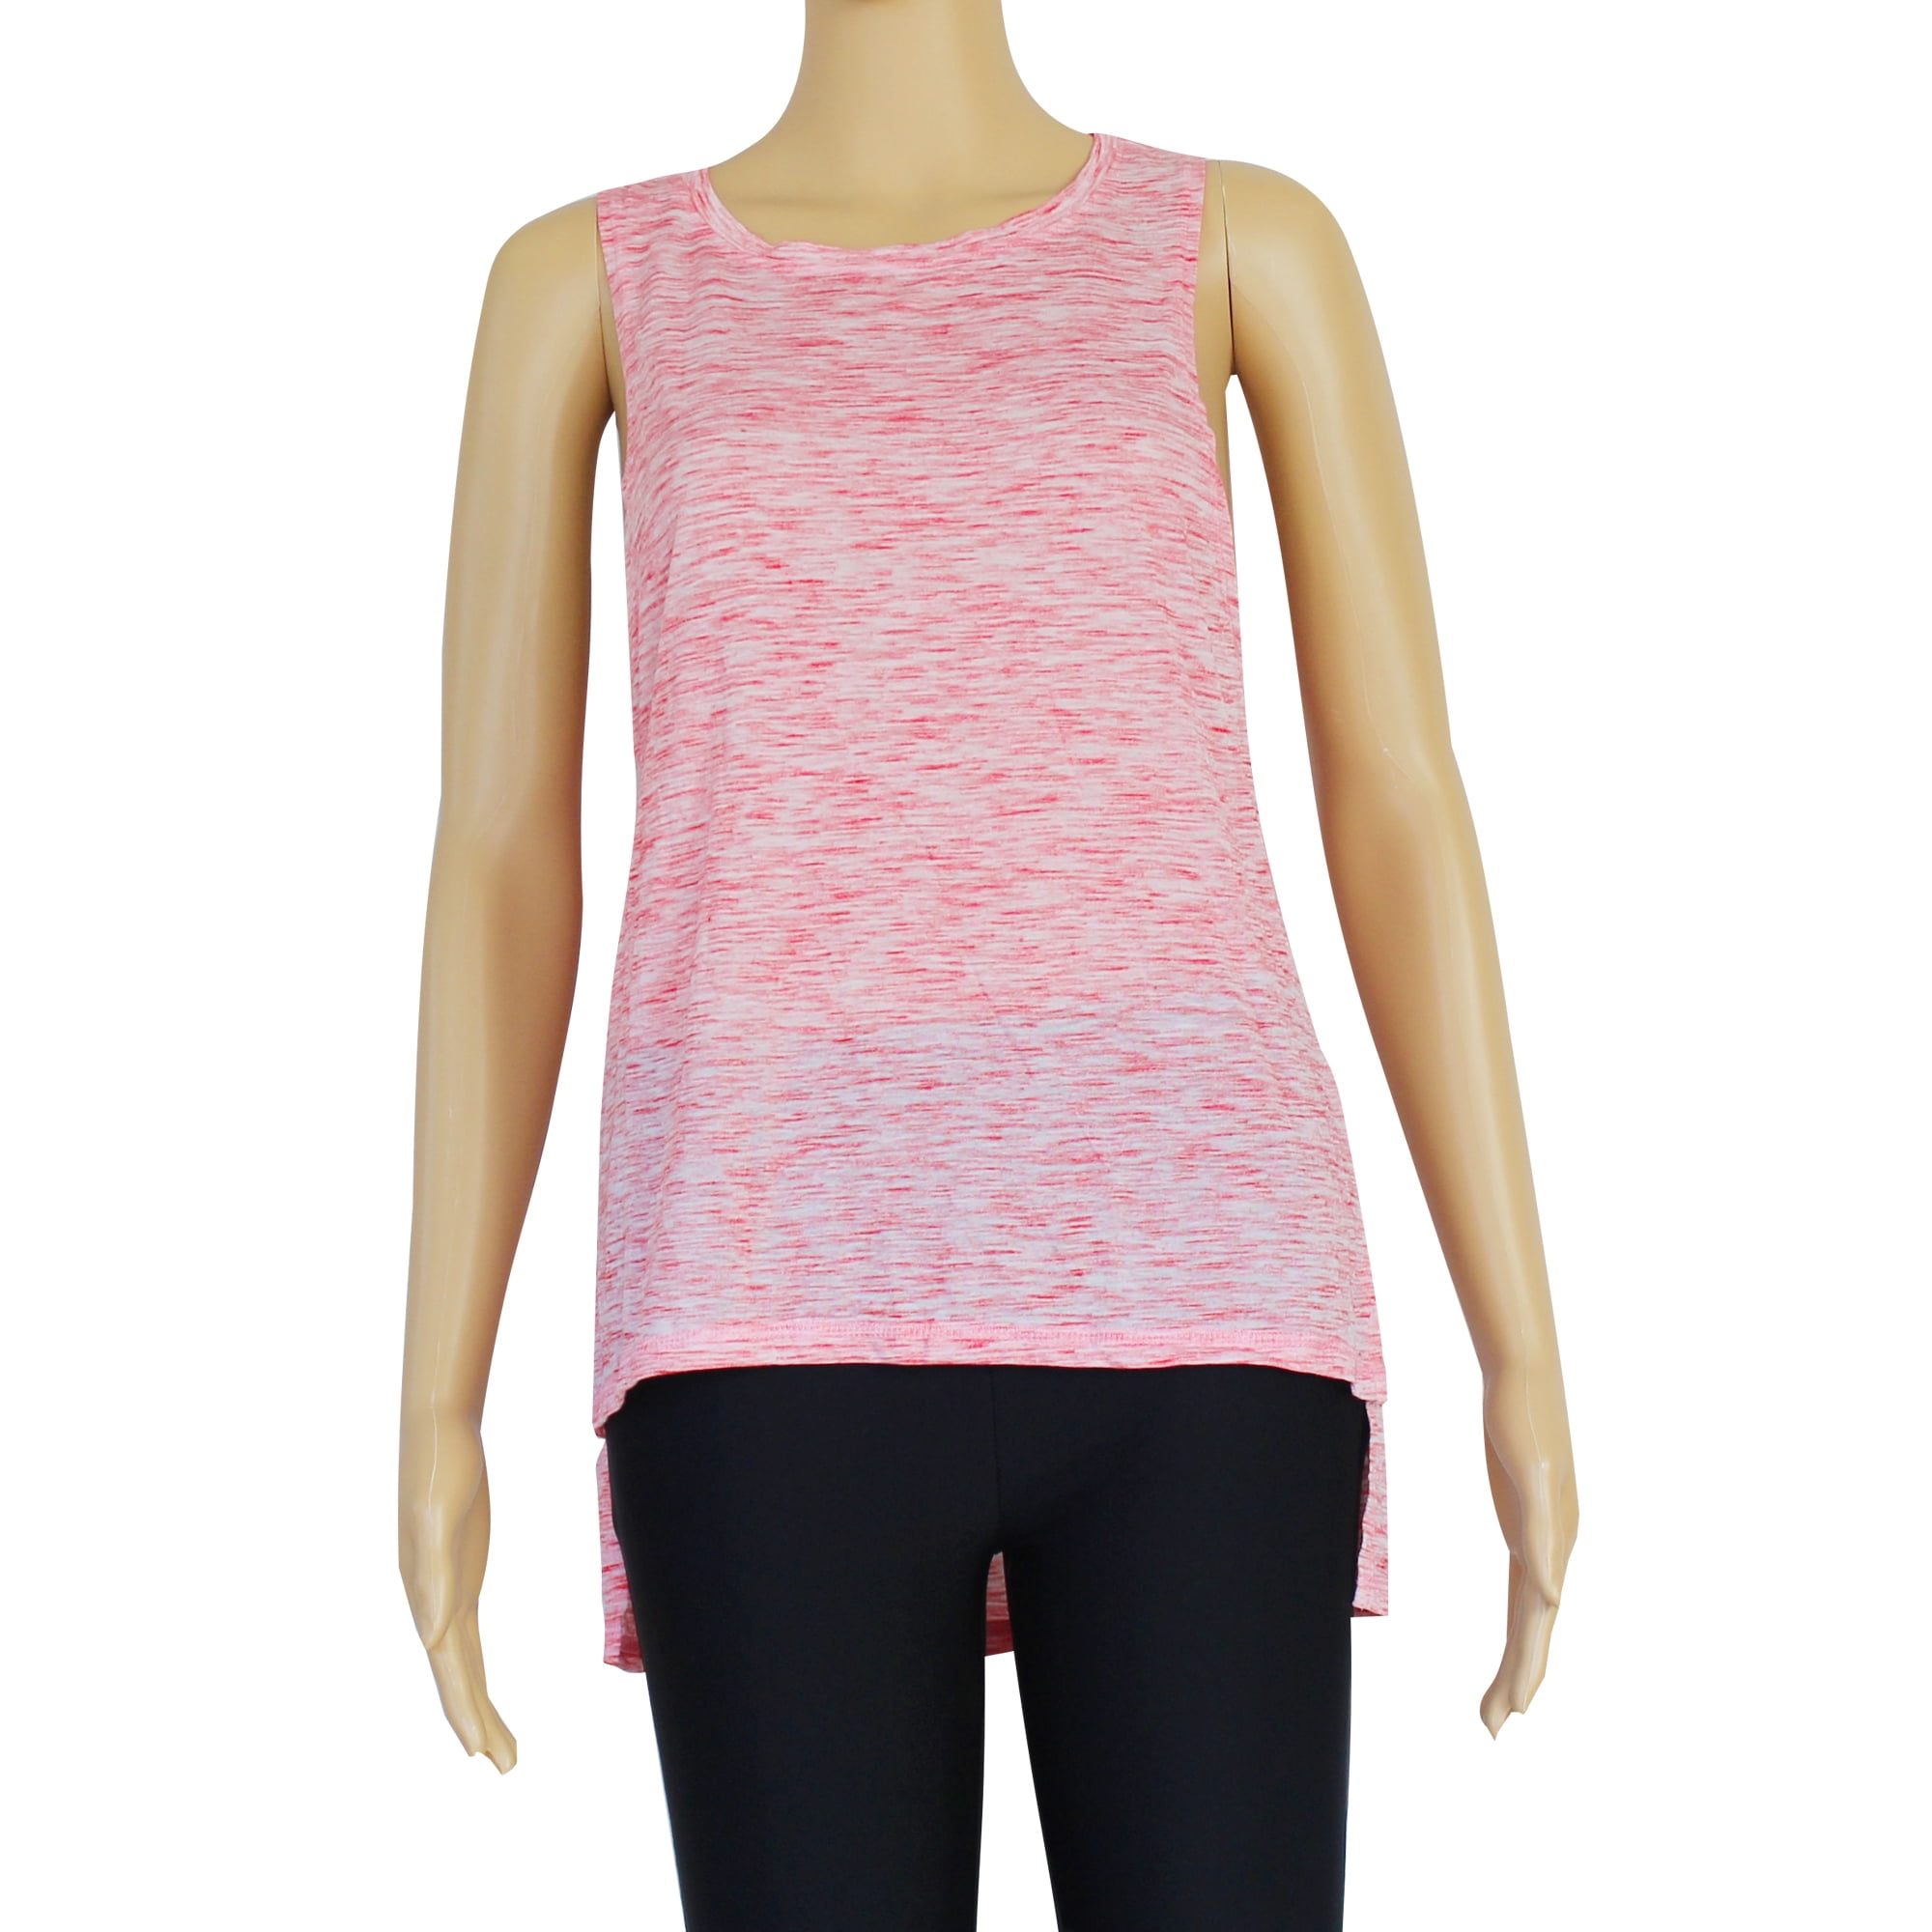 Women's Yoga Tank Tops Stretchy Activewear Tops Long Workout